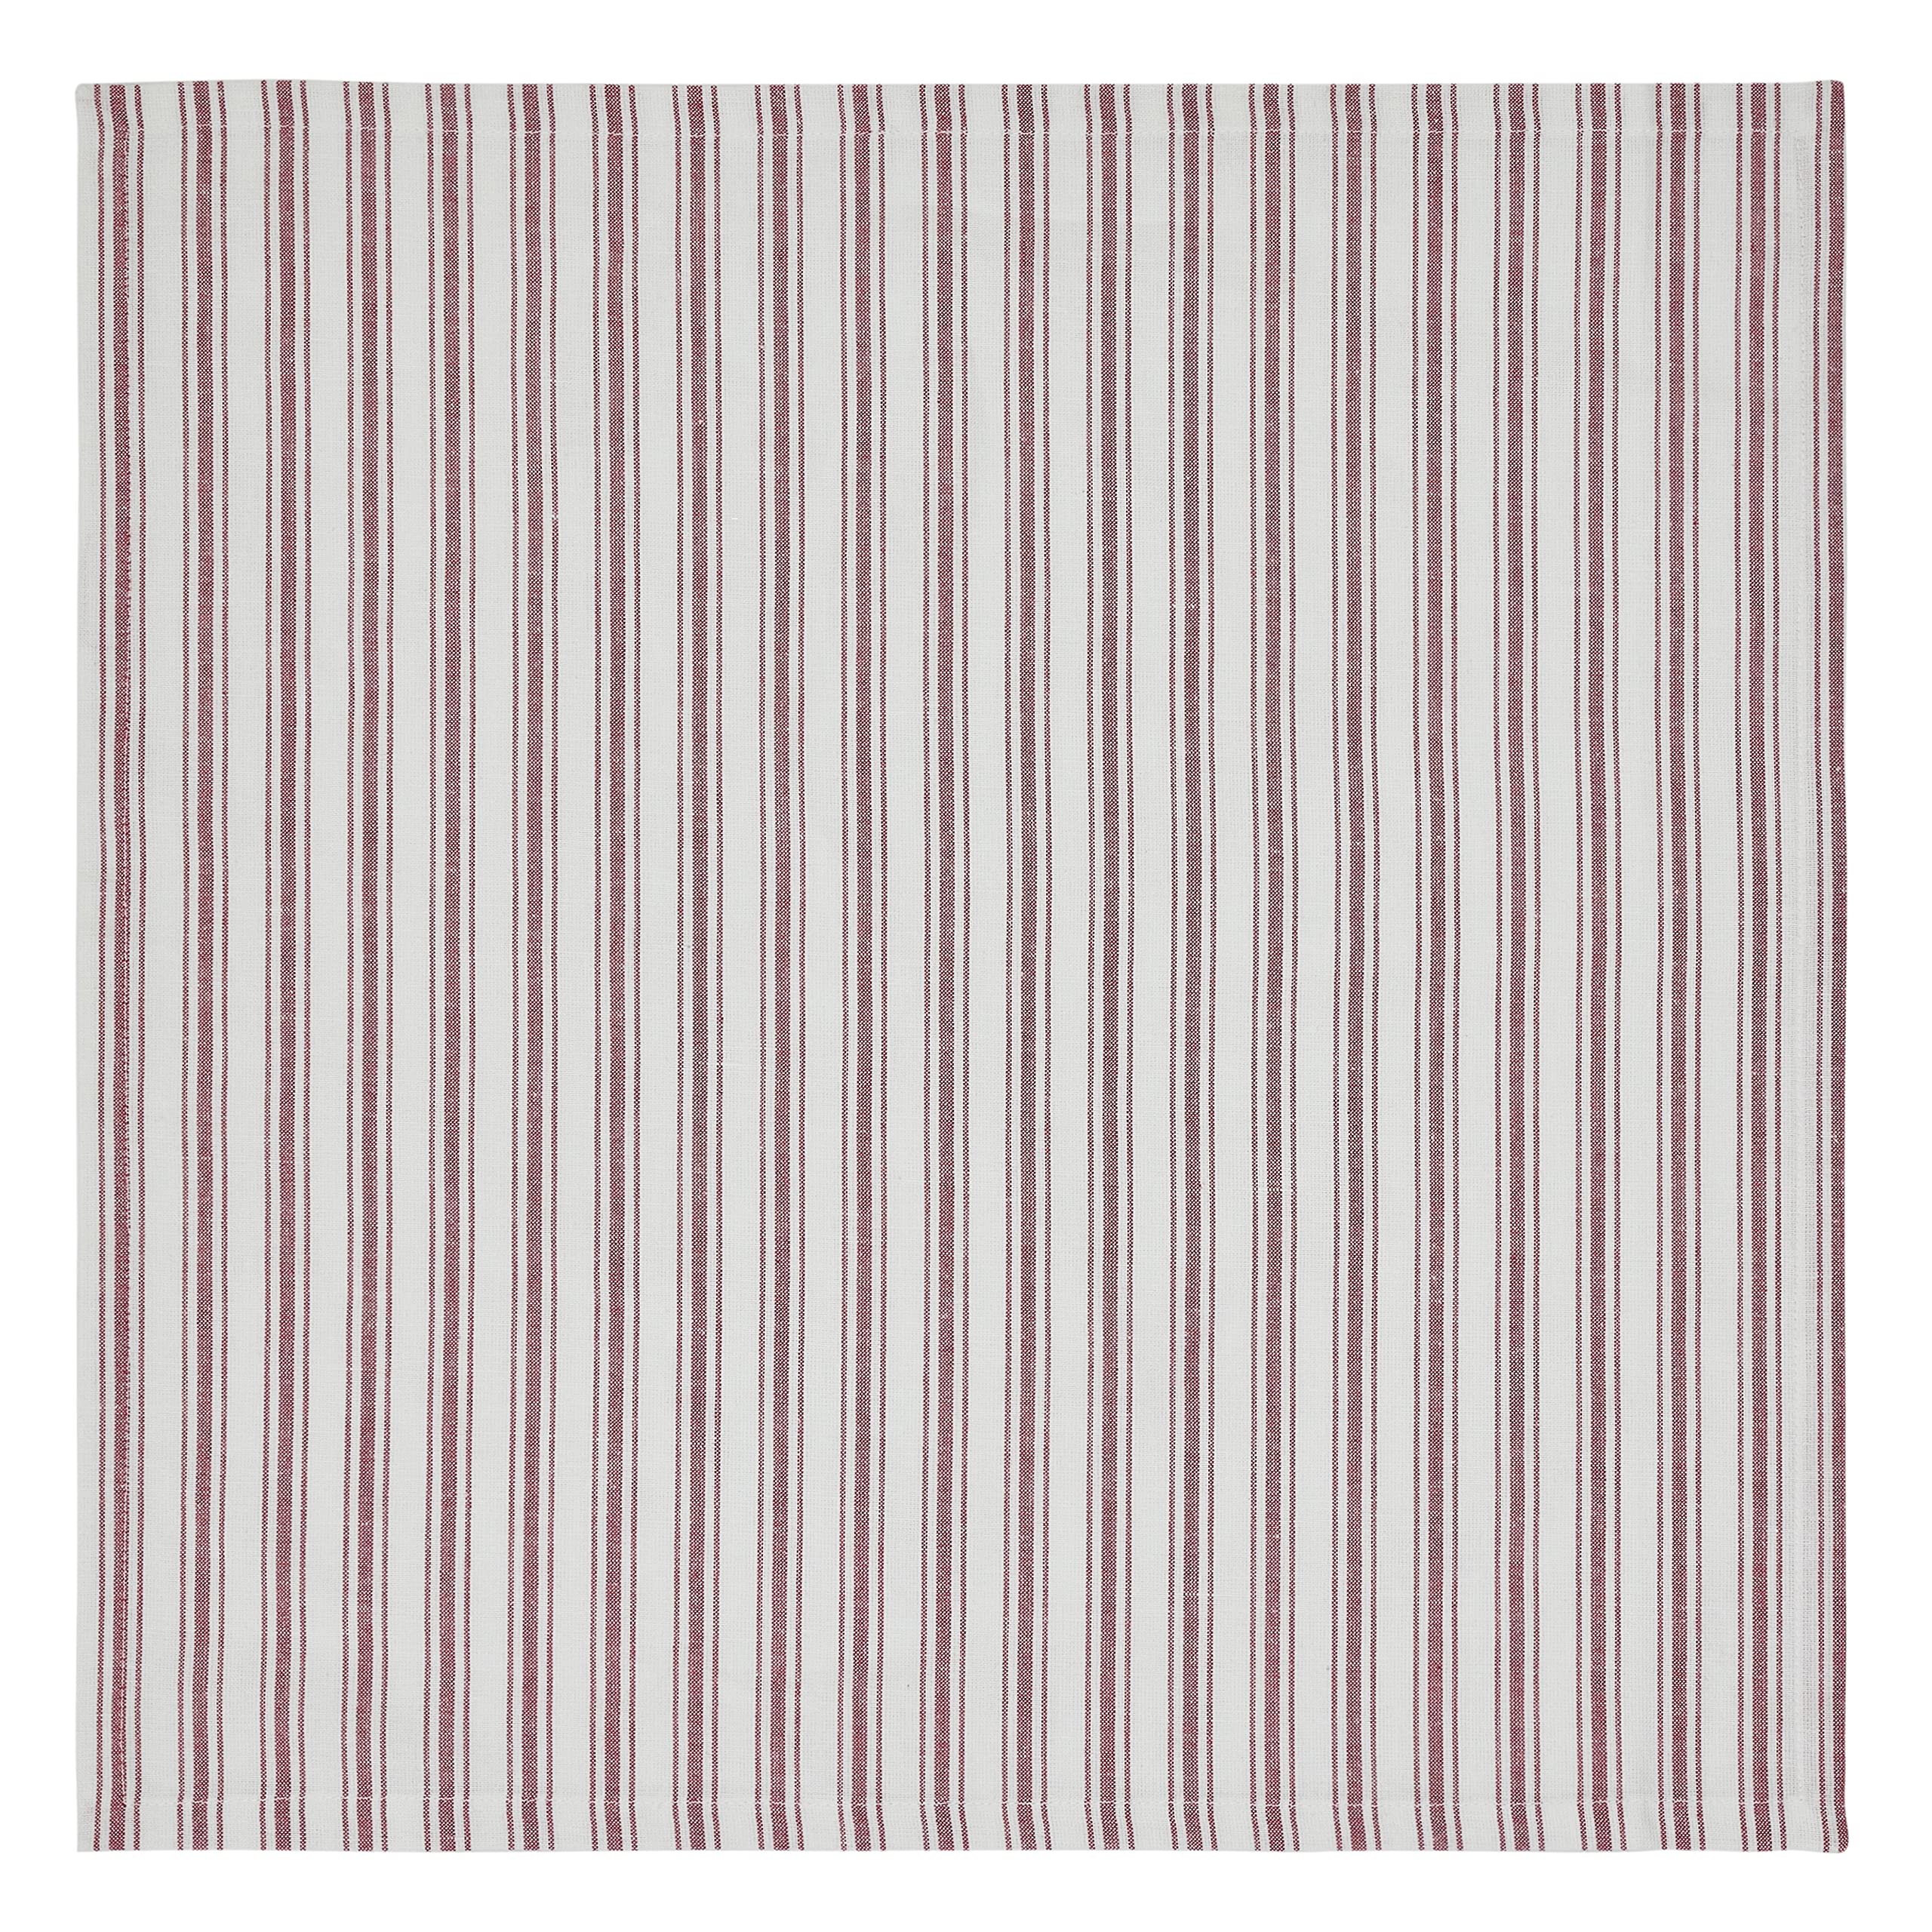 Piper Classics Timeless Ticking Red Ruffled Chair Pad, Country Farmhouse Vintage, Christmas Décor, Red & White Stripe, 16" L x 16" W, Plus Ruffle